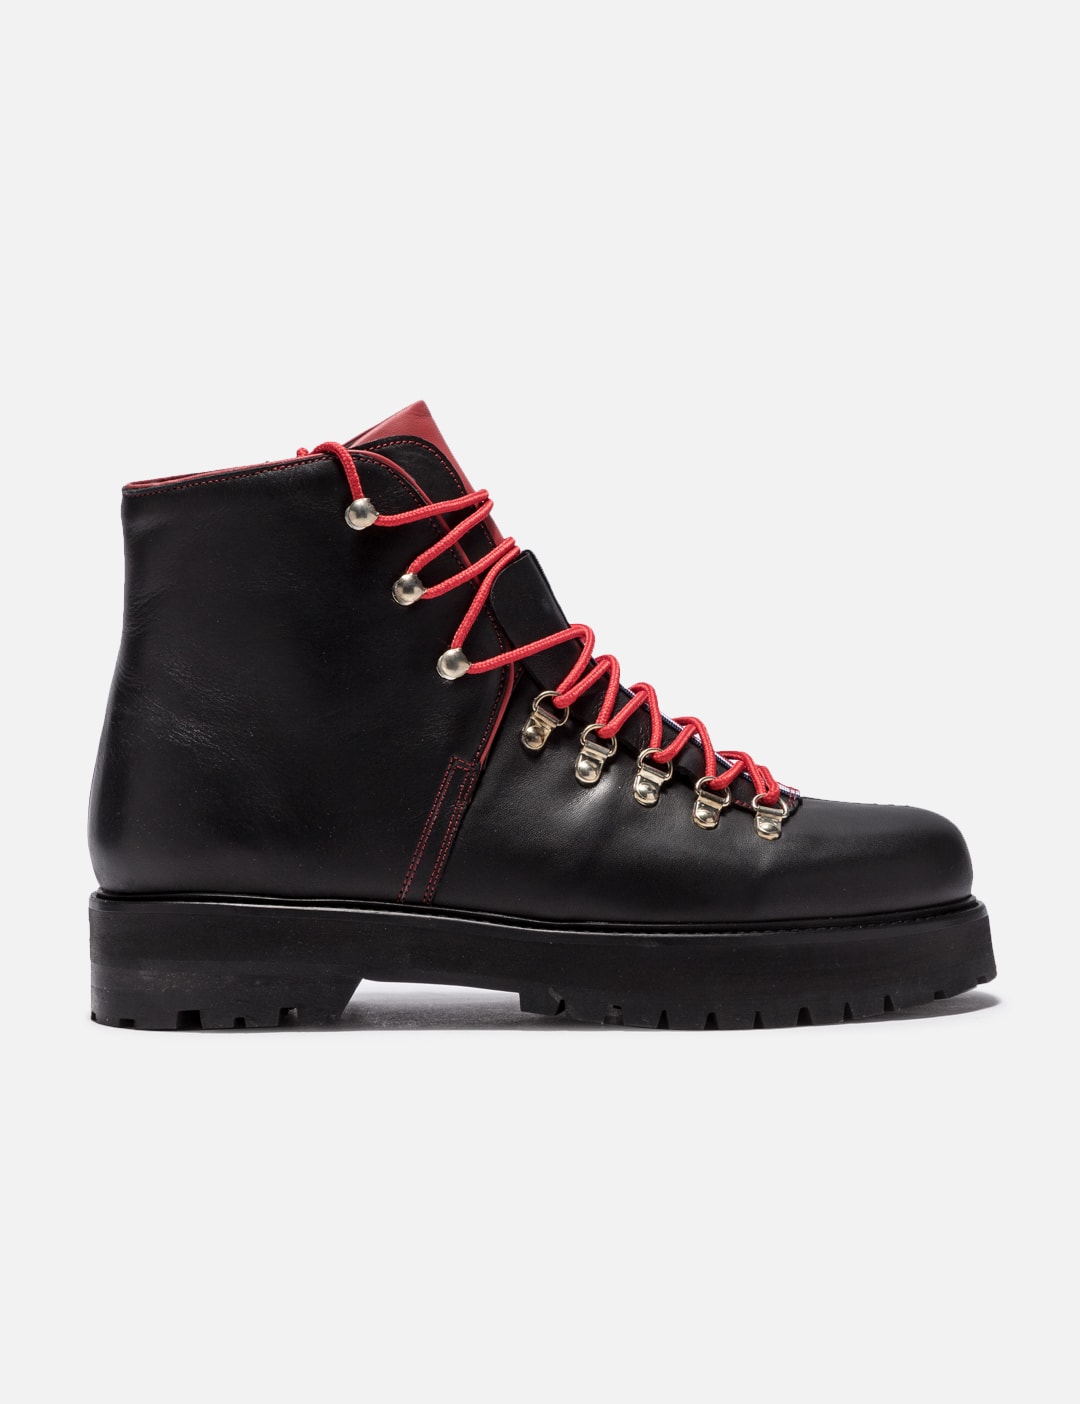 Psykologisk Hobart Bourgeon Tommy Hilfiger - TOMMY HILFIGER BOOTS | HBX - Globally Curated Fashion and  Lifestyle by Hypebeast